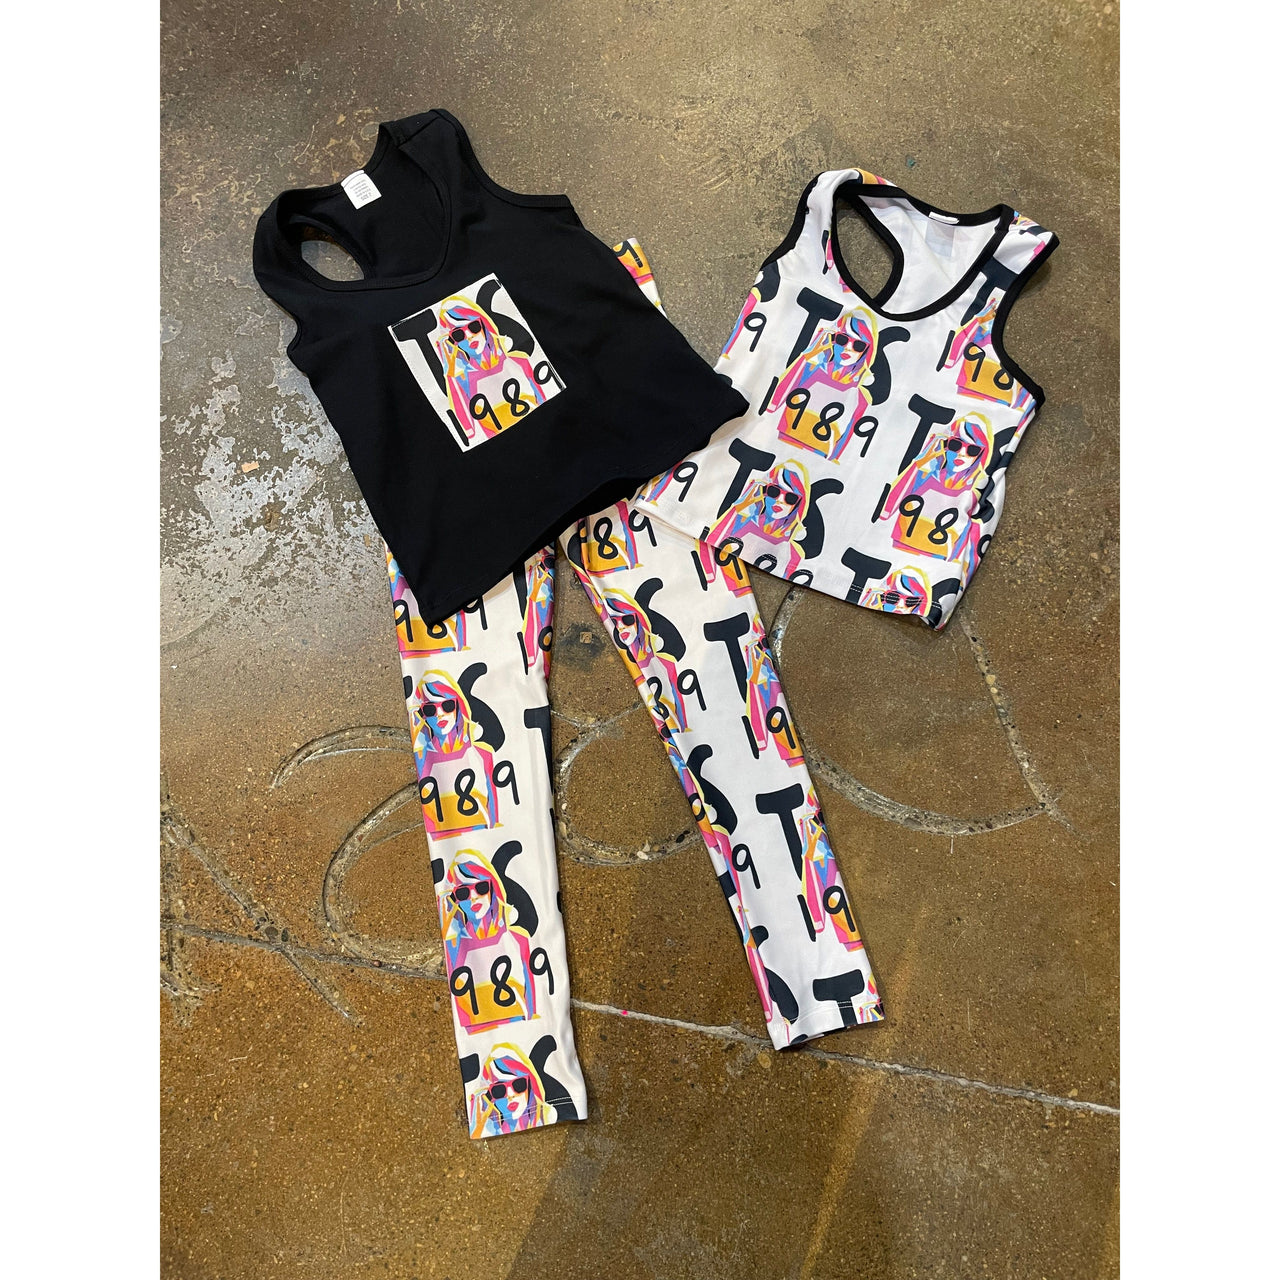 1989 all over print tank